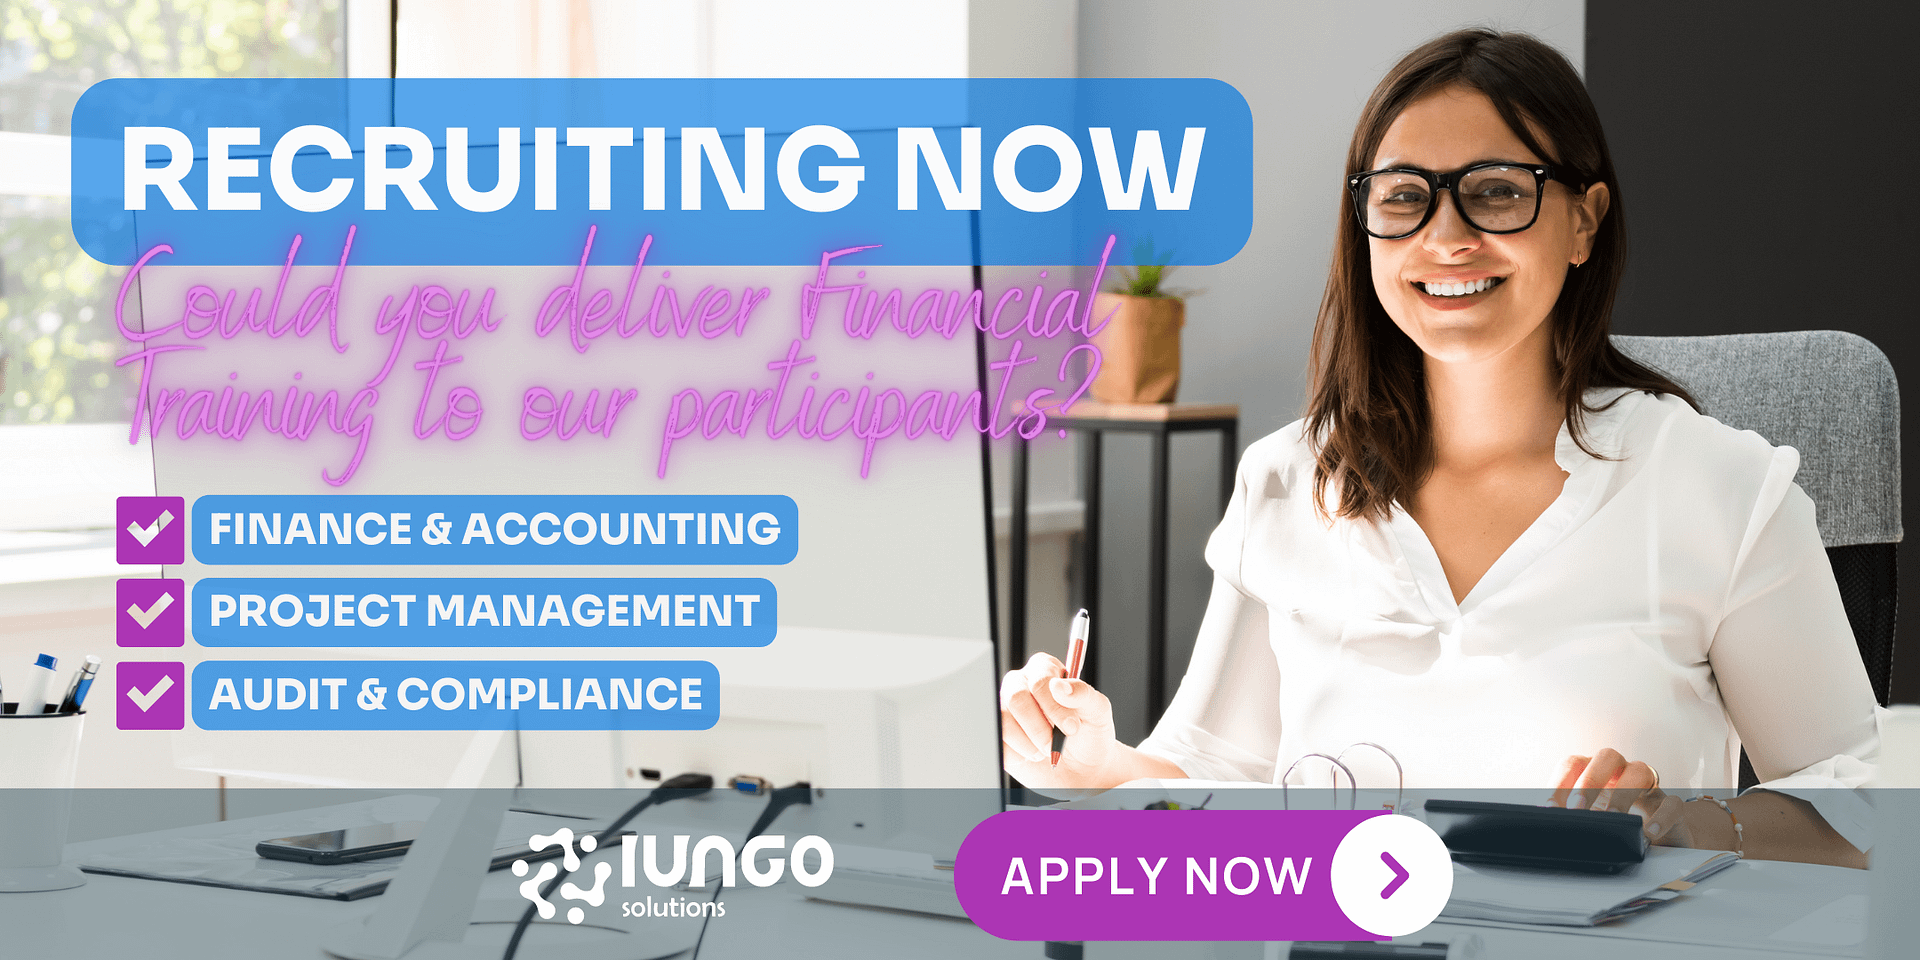 Recruiting Now: Finance Tutor Practitioner